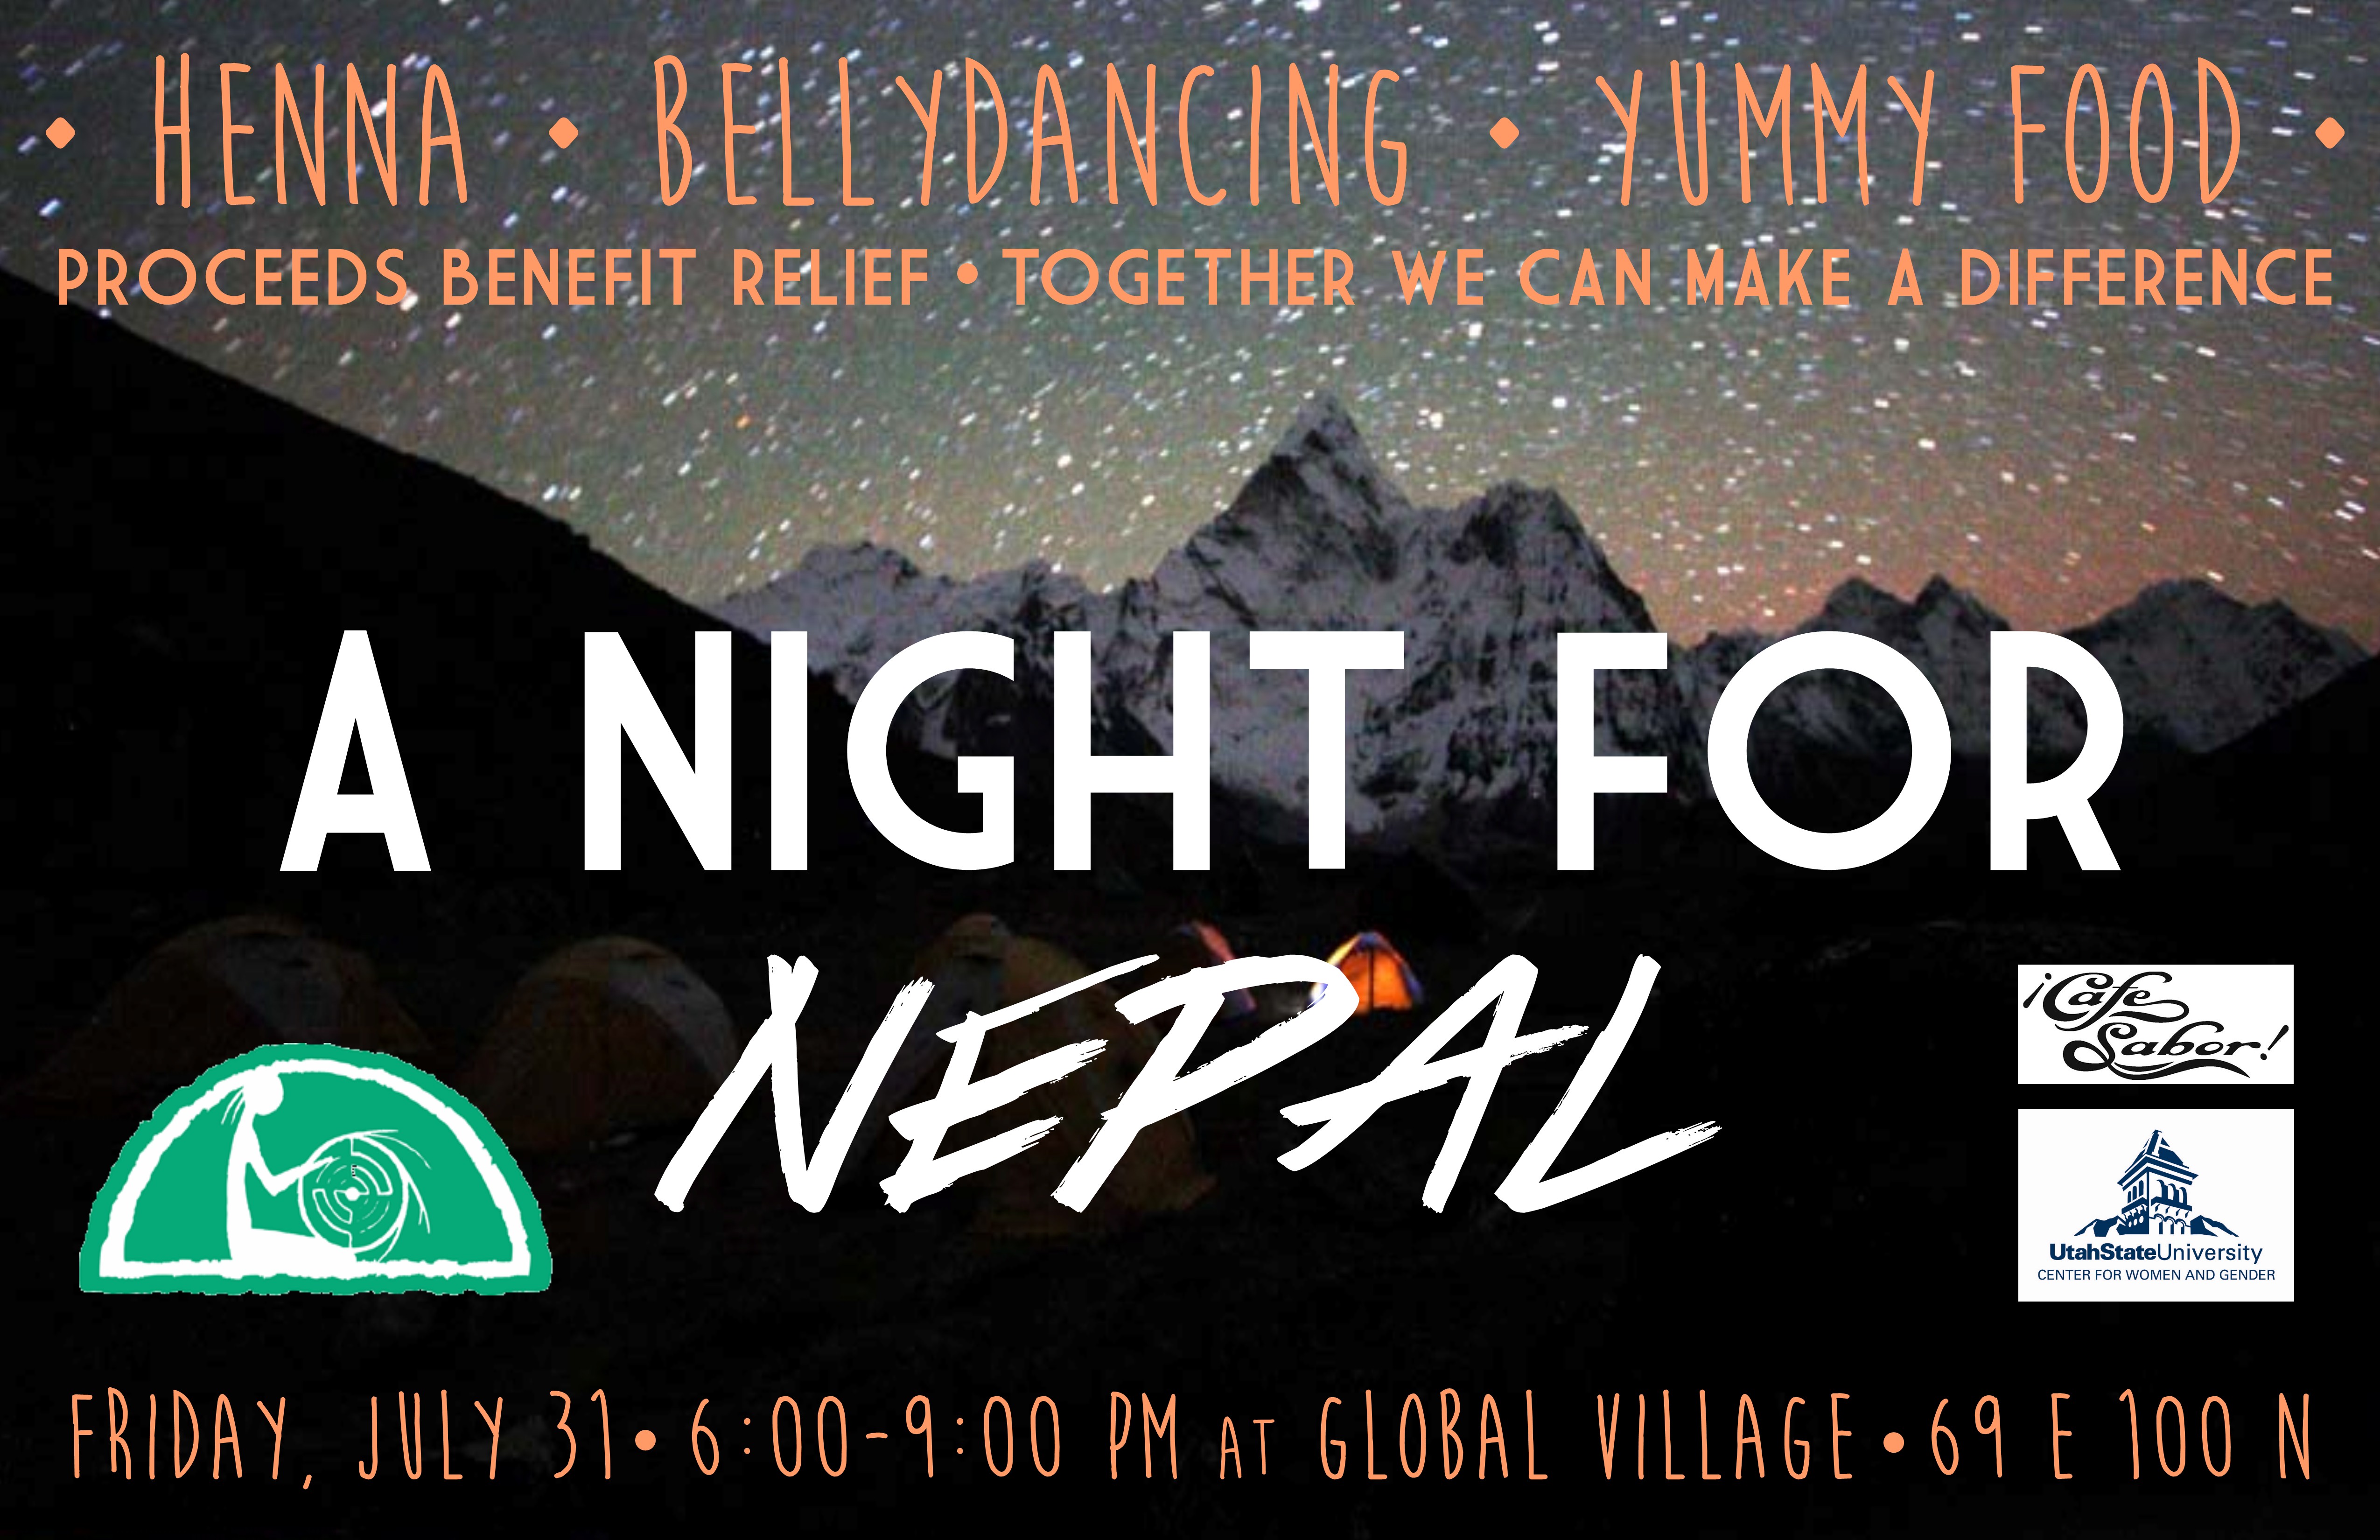 A Night for Nepal